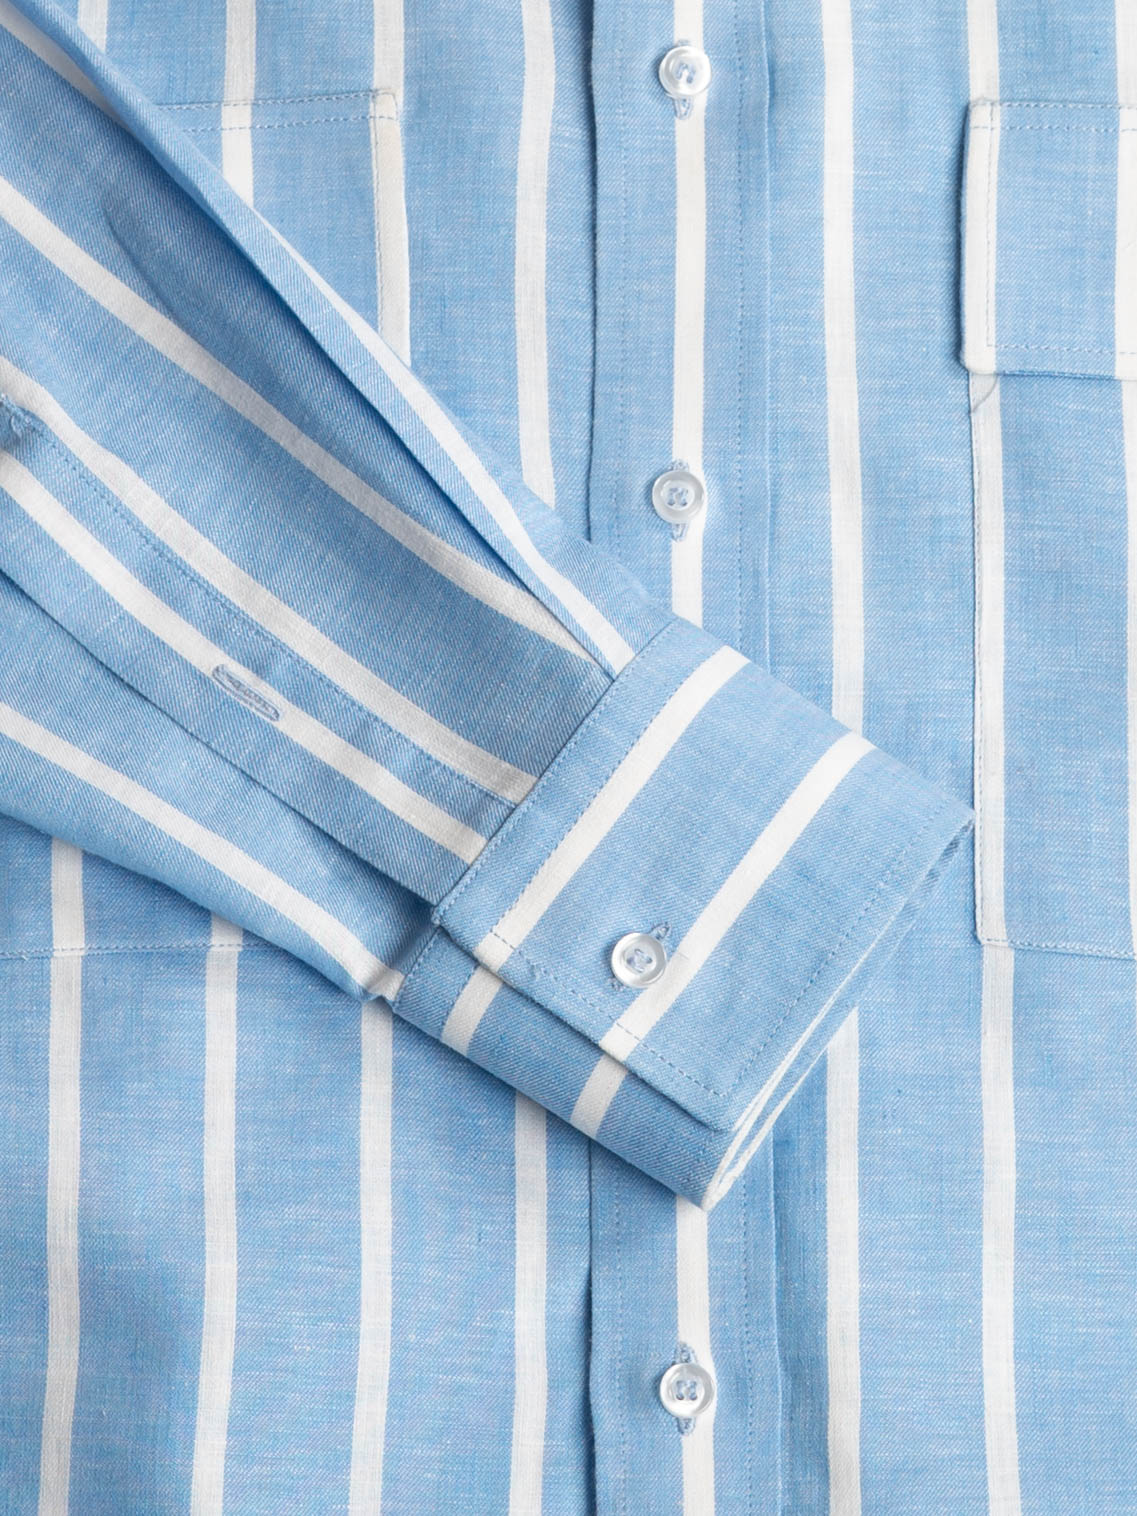 Packshot SHIRT BLUE AND WHITE COTTON AND LINEN STRIPED CUFF